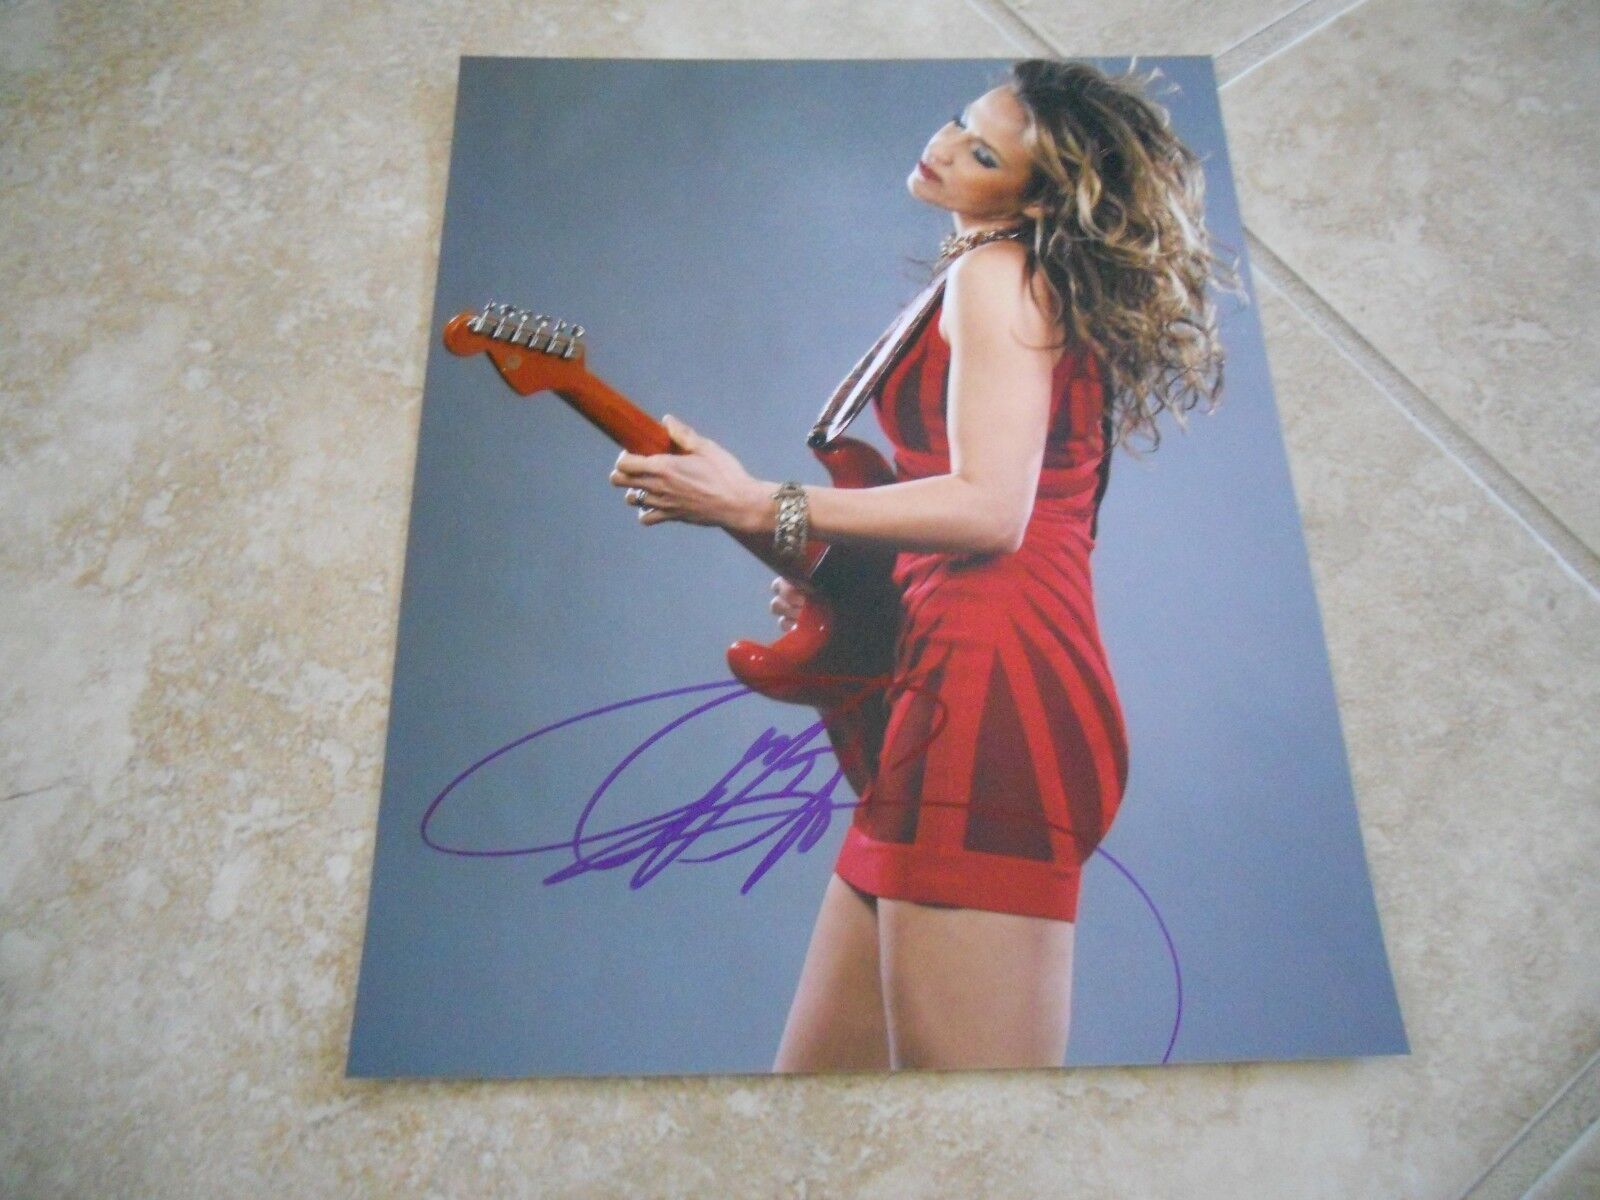 Anna Popovick Sexy Signed Autographed 8x10 Music Photo Poster painting PSA Guaranteed #5